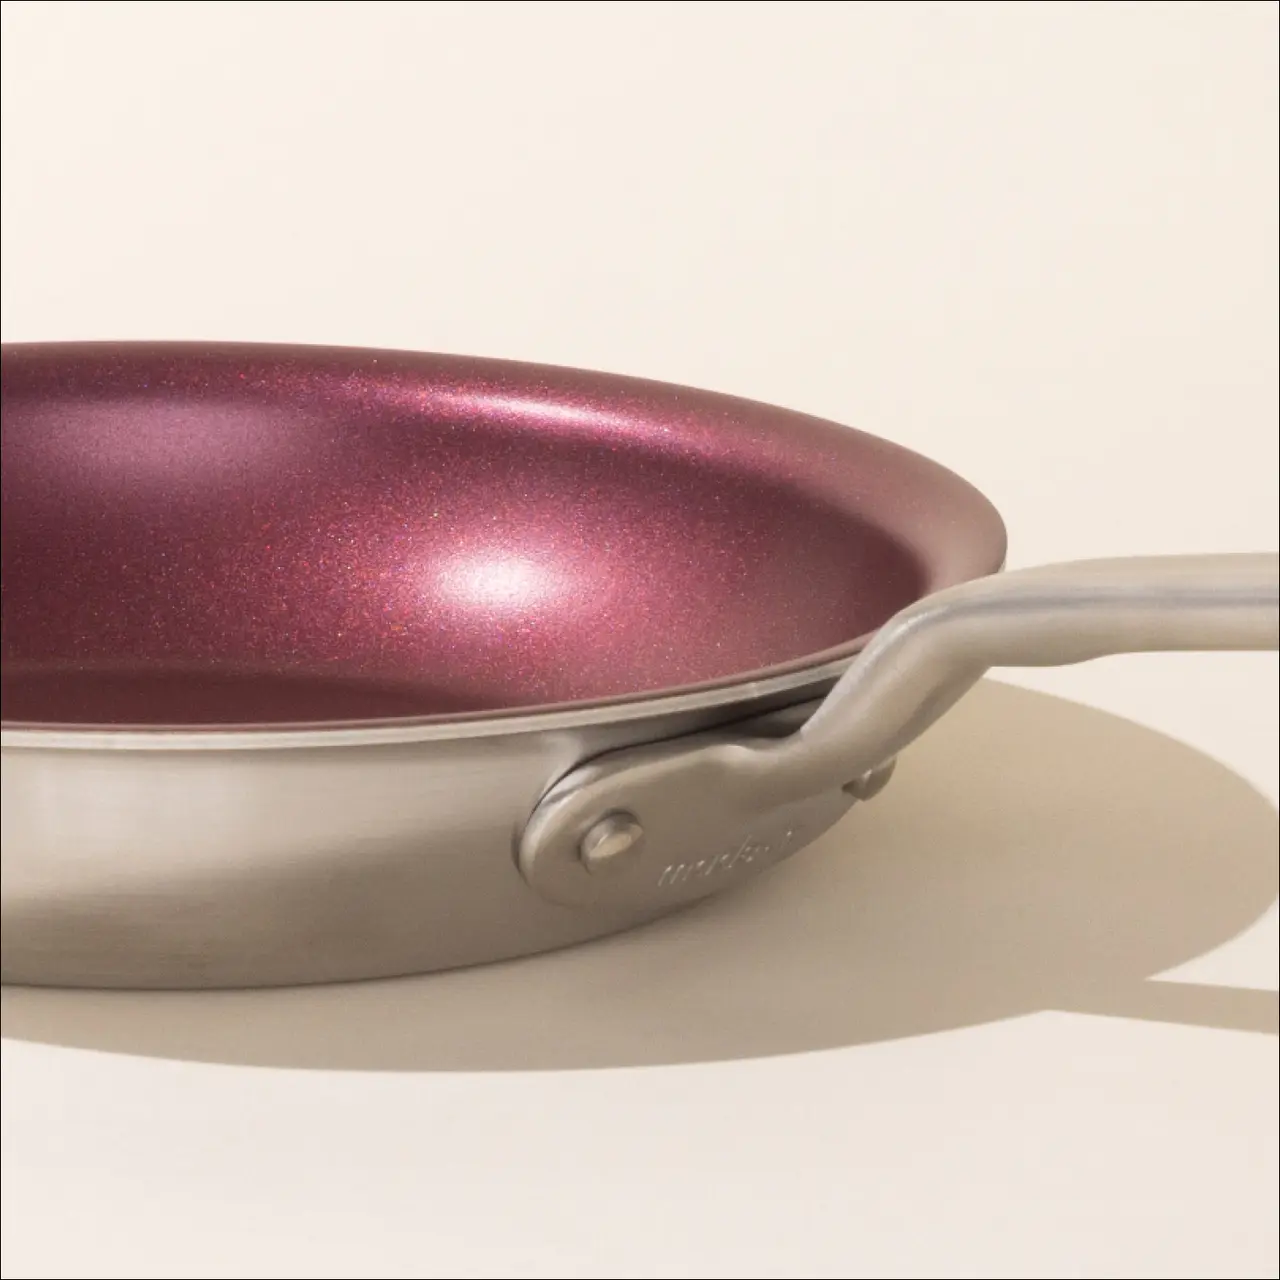 A close-up of a shiny purple non-stick frying pan with a stainless steel handle on a light background.